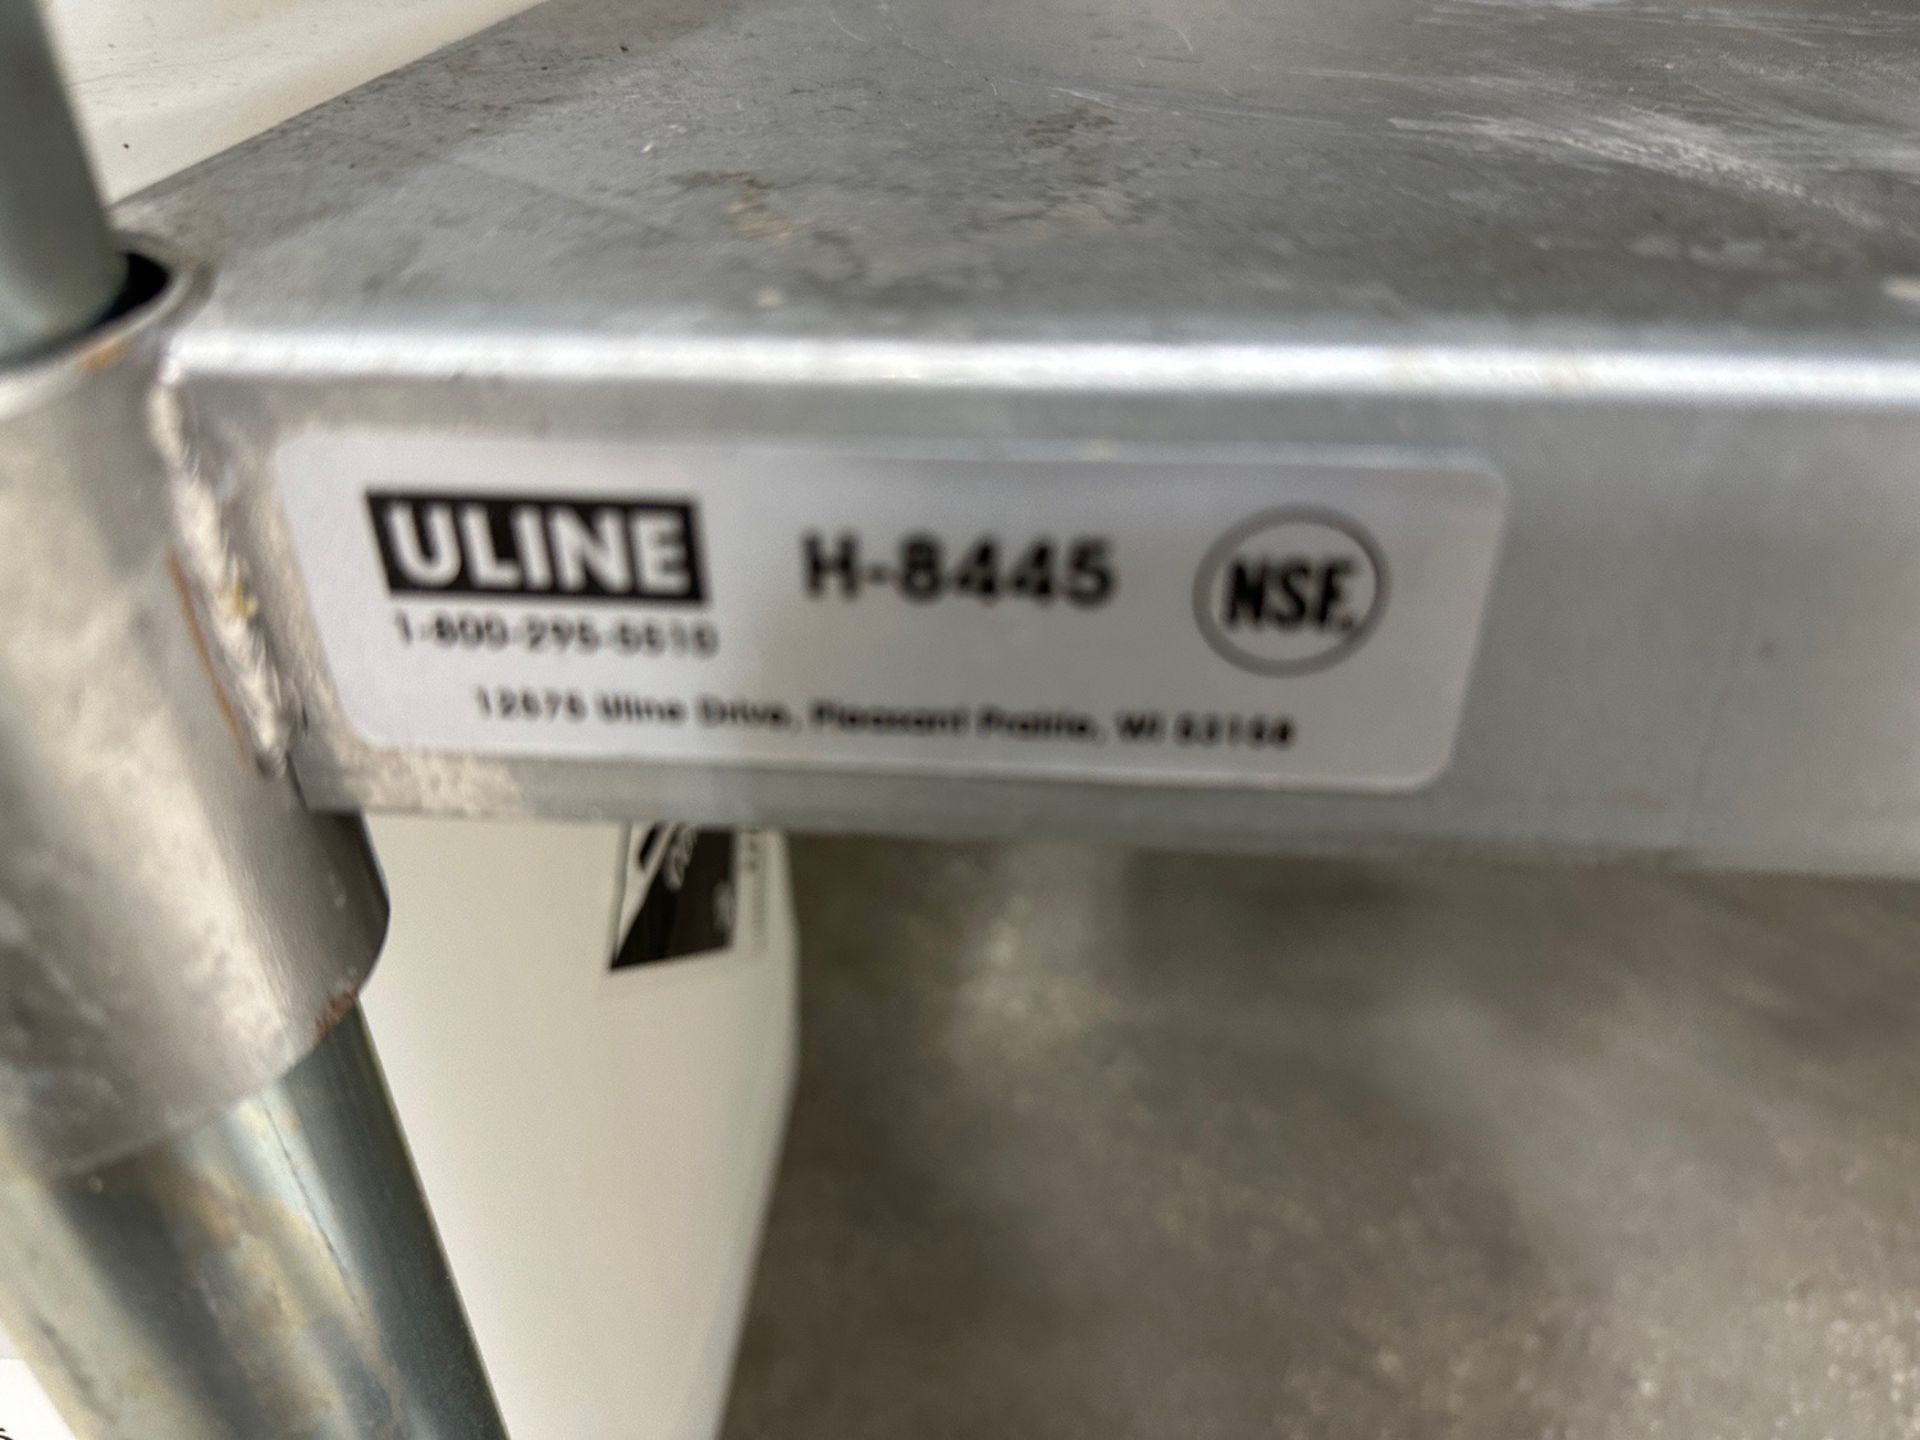 Uline Stainless Steel Table (Approx. 2' x 4') - Image 2 of 2